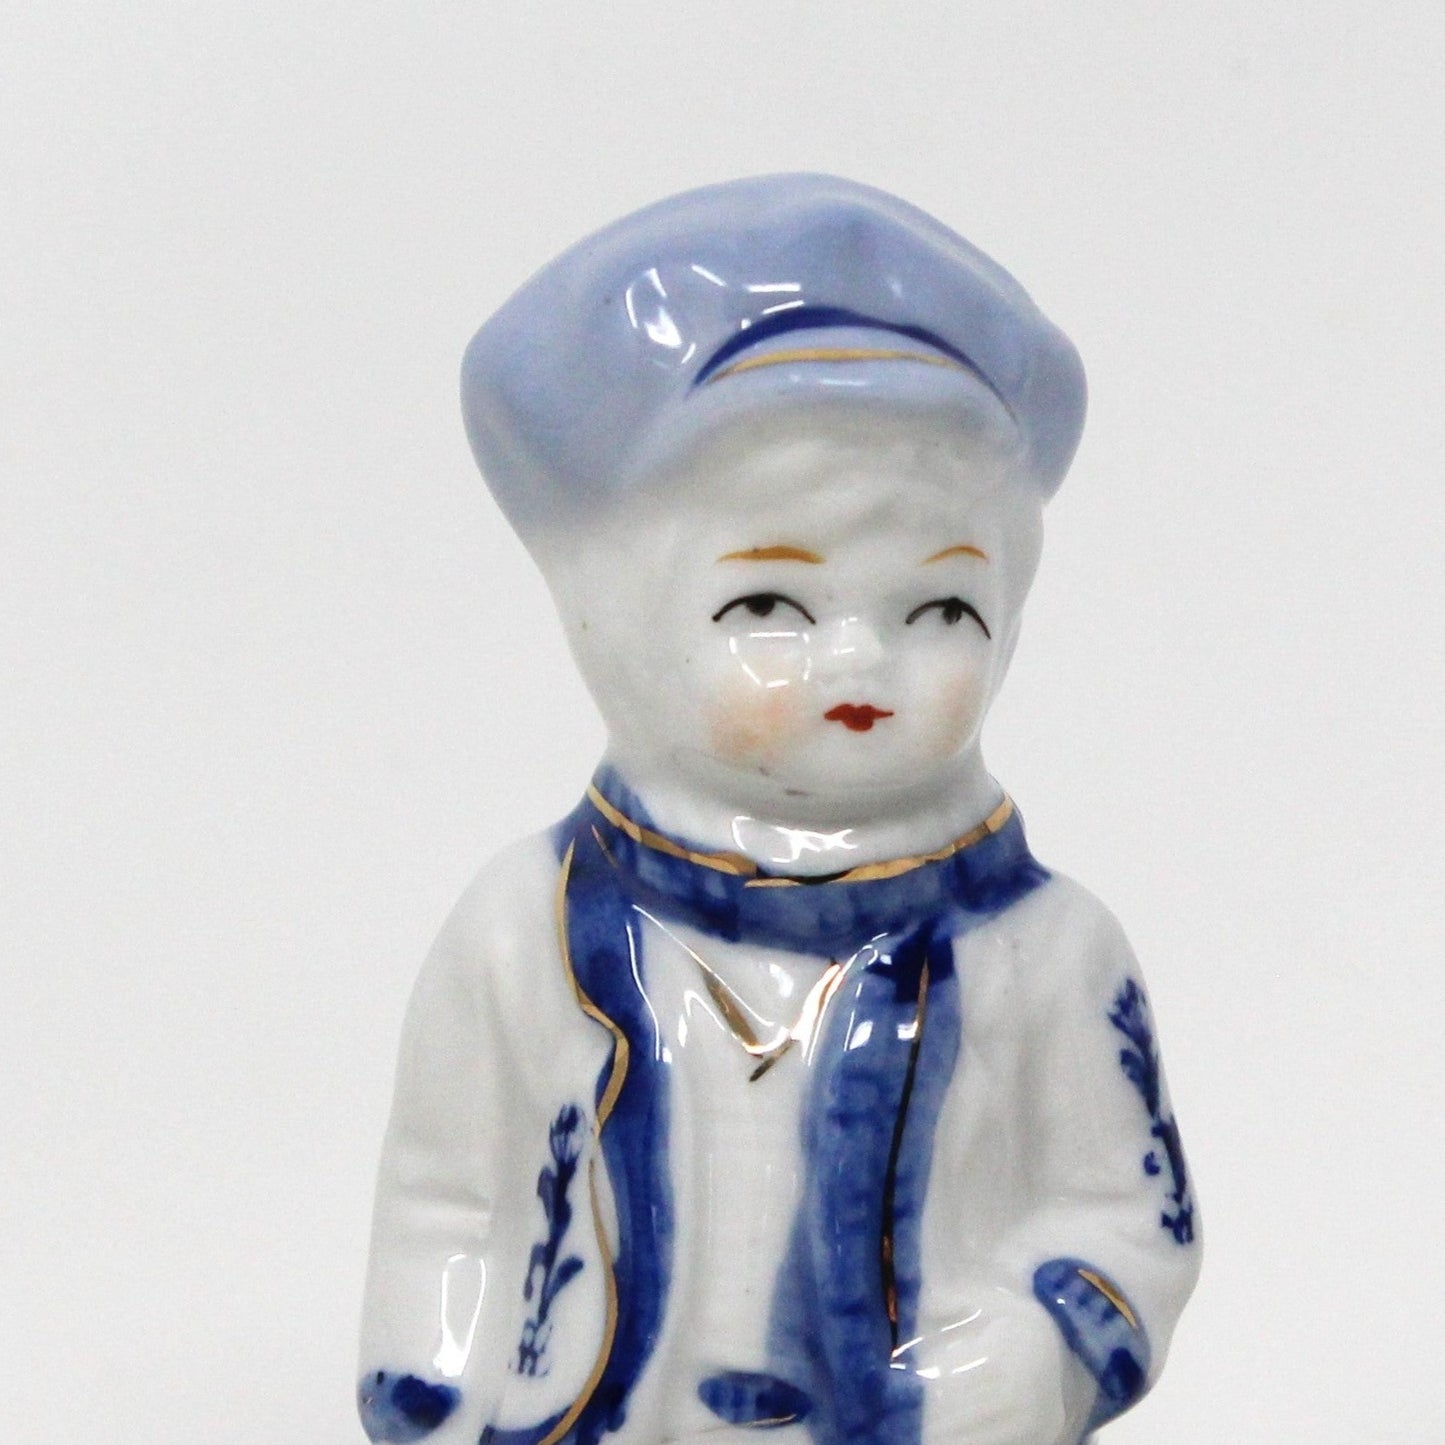 Figurine, Boy and Girl Holding Pets, Blue & White Porcelain, Hand Painted, Vintage Set of 2